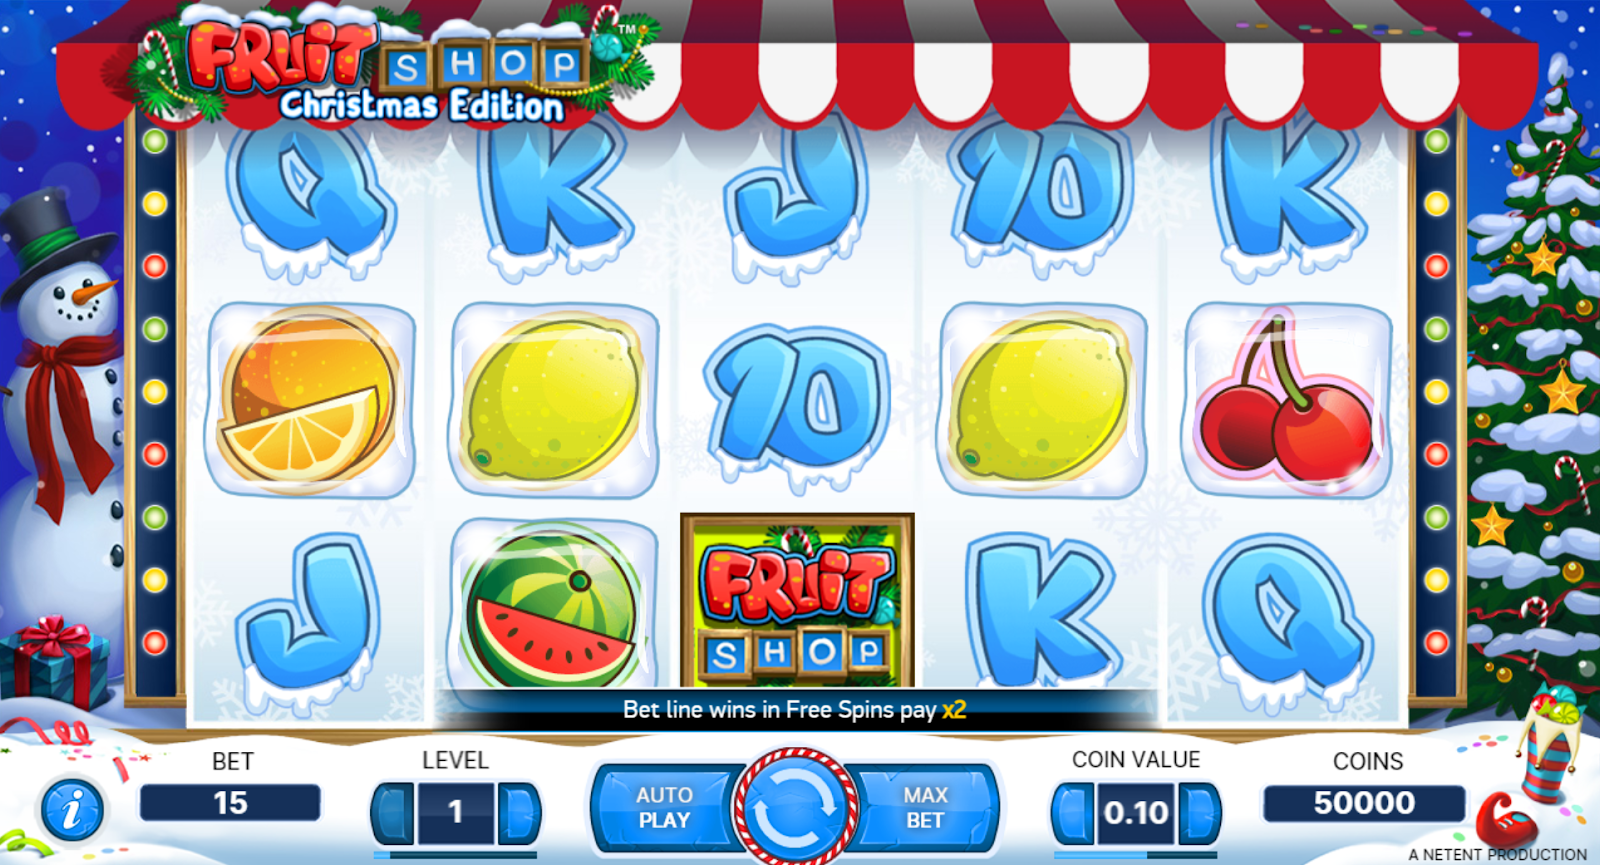 A screen shot of a slot game with frozen fruits in a christmas background with a snow man and christmas tree.

